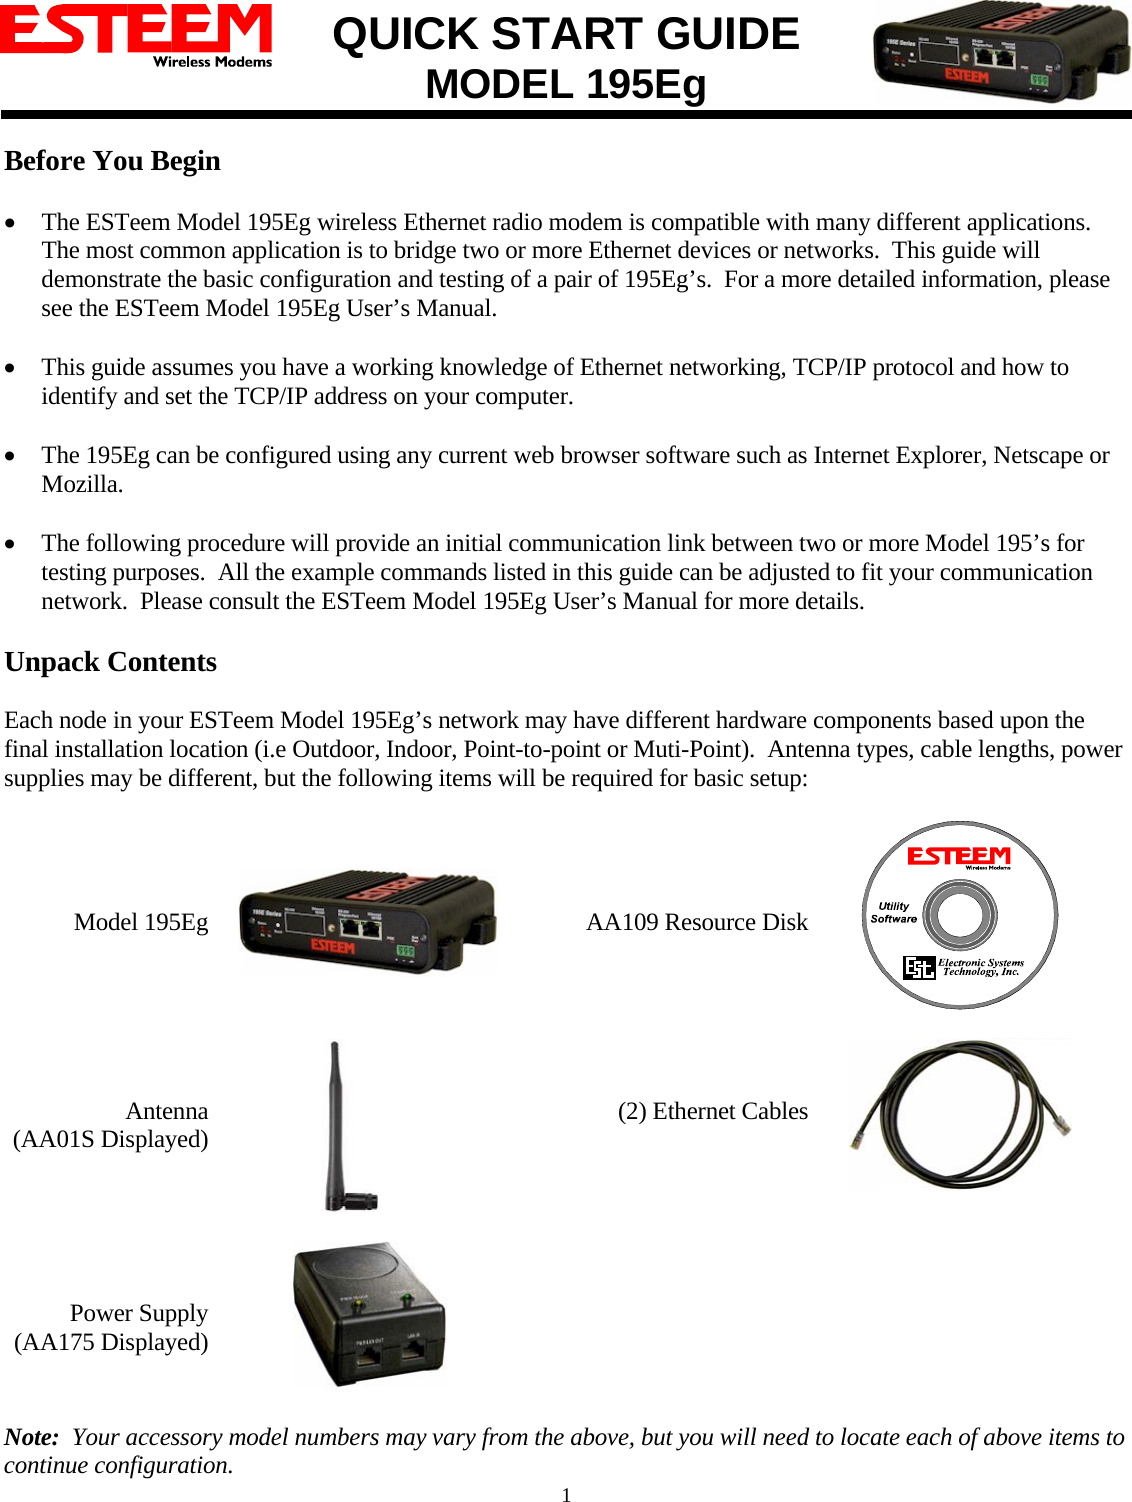 QUICK START GUIDE MODEL 195Eg   1 Before You Begin  • The ESTeem Model 195Eg wireless Ethernet radio modem is compatible with many different applications.  The most common application is to bridge two or more Ethernet devices or networks.  This guide will demonstrate the basic configuration and testing of a pair of 195Eg’s.  For a more detailed information, please see the ESTeem Model 195Eg User’s Manual.  • This guide assumes you have a working knowledge of Ethernet networking, TCP/IP protocol and how to identify and set the TCP/IP address on your computer.  • The 195Eg can be configured using any current web browser software such as Internet Explorer, Netscape or Mozilla.  • The following procedure will provide an initial communication link between two or more Model 195’s for testing purposes.  All the example commands listed in this guide can be adjusted to fit your communication network.  Please consult the ESTeem Model 195Eg User’s Manual for more details.  Unpack Contents  Each node in your ESTeem Model 195Eg’s network may have different hardware components based upon the final installation location (i.e Outdoor, Indoor, Point-to-point or Muti-Point).  Antenna types, cable lengths, power supplies may be different, but the following items will be required for basic setup:     Model 195Eg       AA109 Resource Disk       Antenna  (AA01S Displayed)                    (2) Ethernet Cables       Power Supply (AA175 Displayed)    Note:  Your accessory model numbers may vary from the above, but you will need to locate each of above items to continue configuration.  